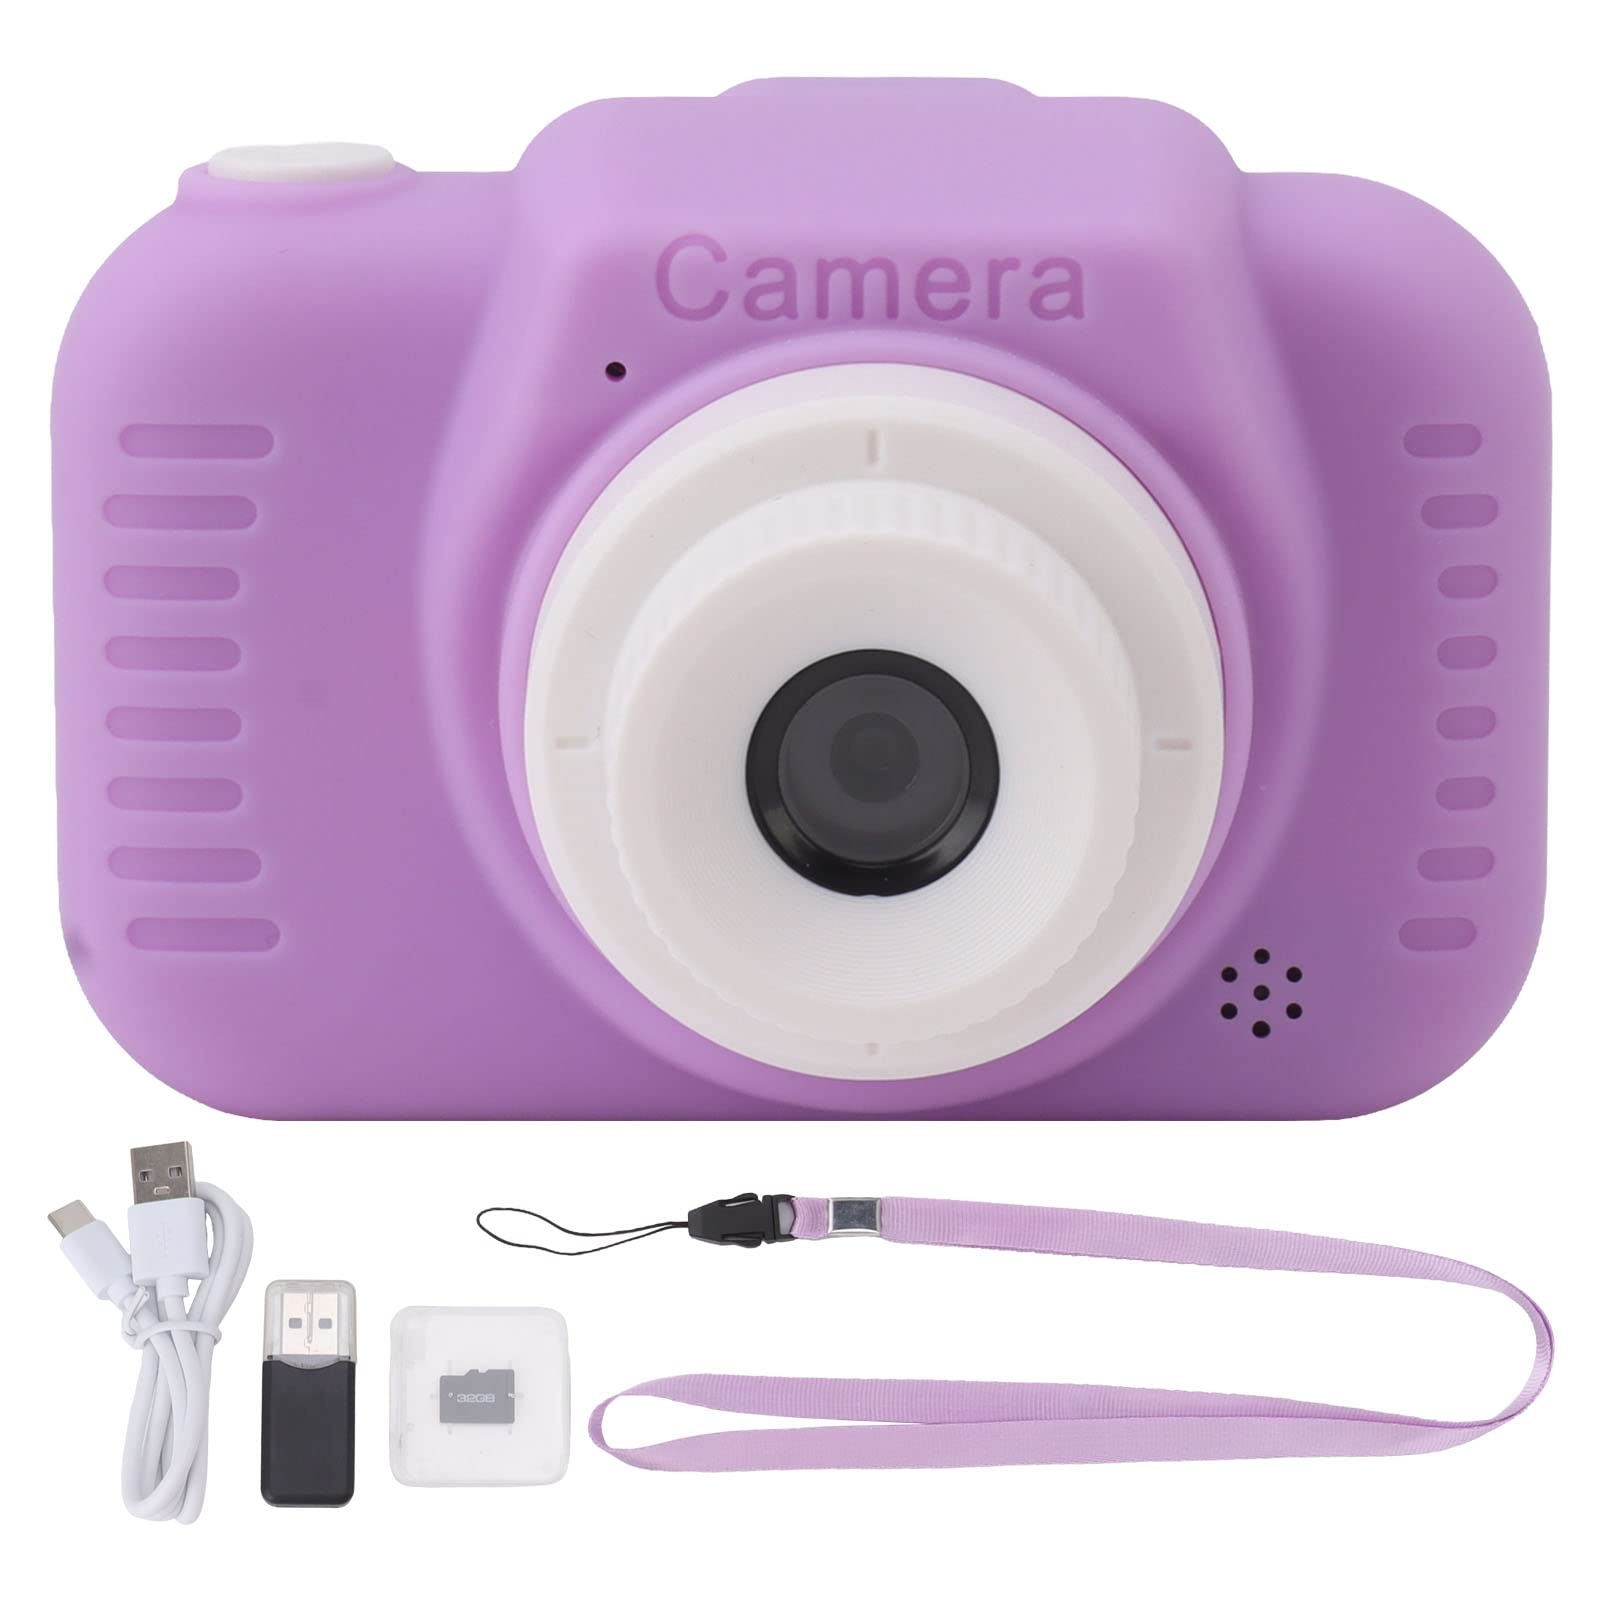 Jopwkuin Selfie Camera Toy, Portable Front Rear Lens Kids Digital Camera USB Rechargeable with 32G Card for Outdoor (Purple)